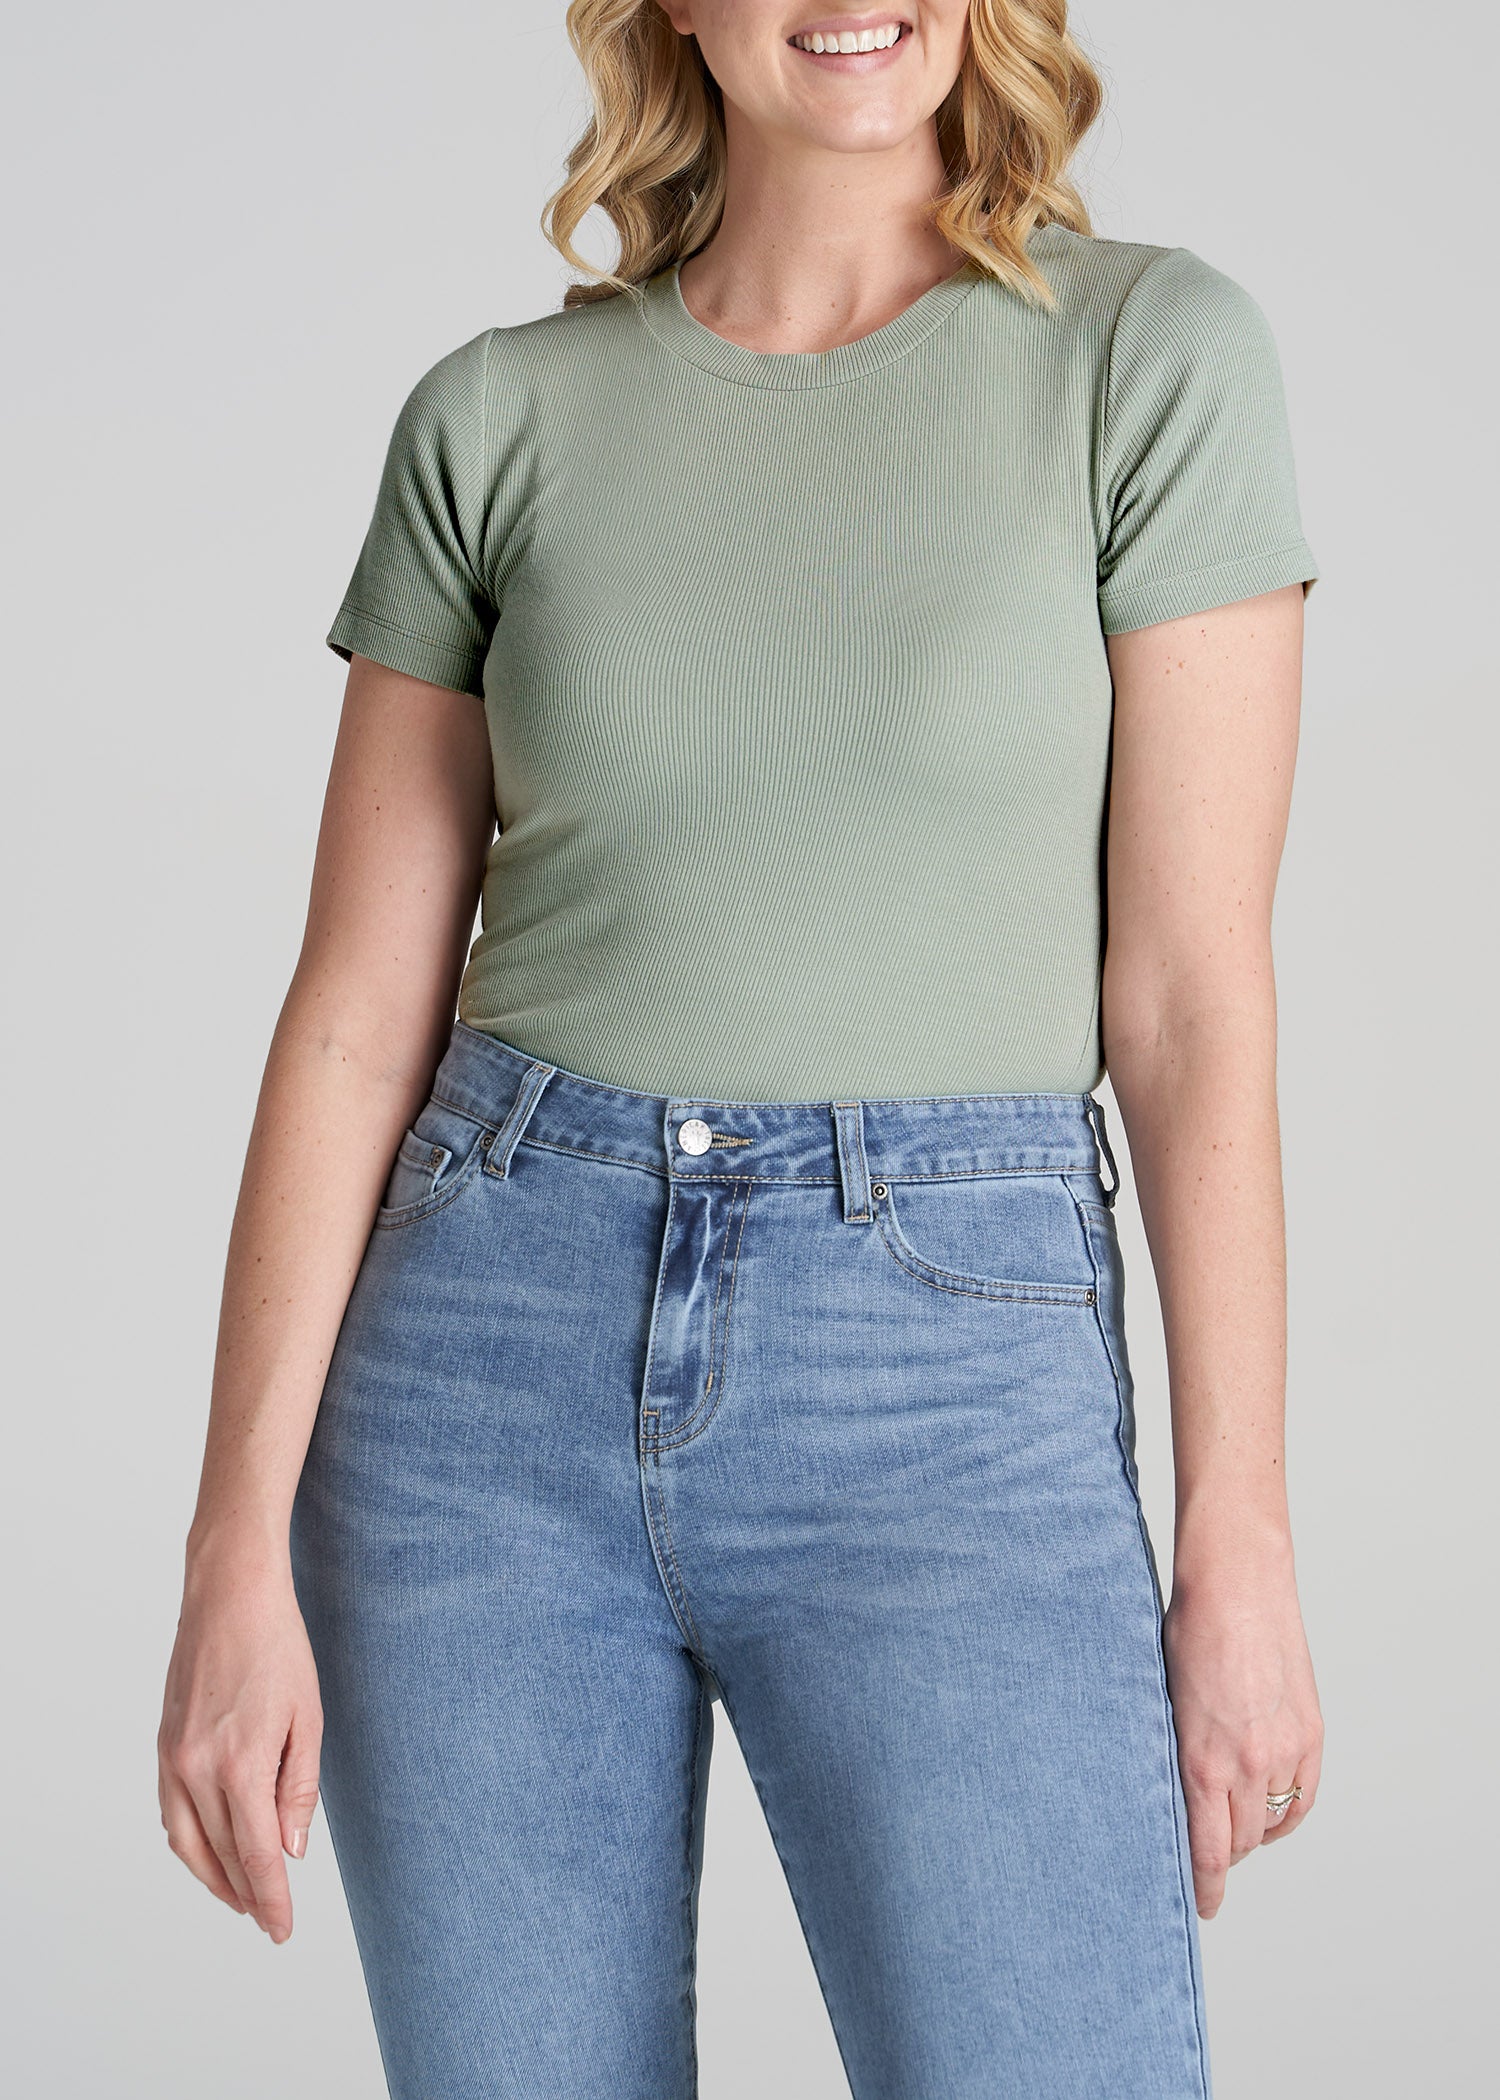 FITTED Ribbed Tee in Sage Green - Women's Tall T-Shirts